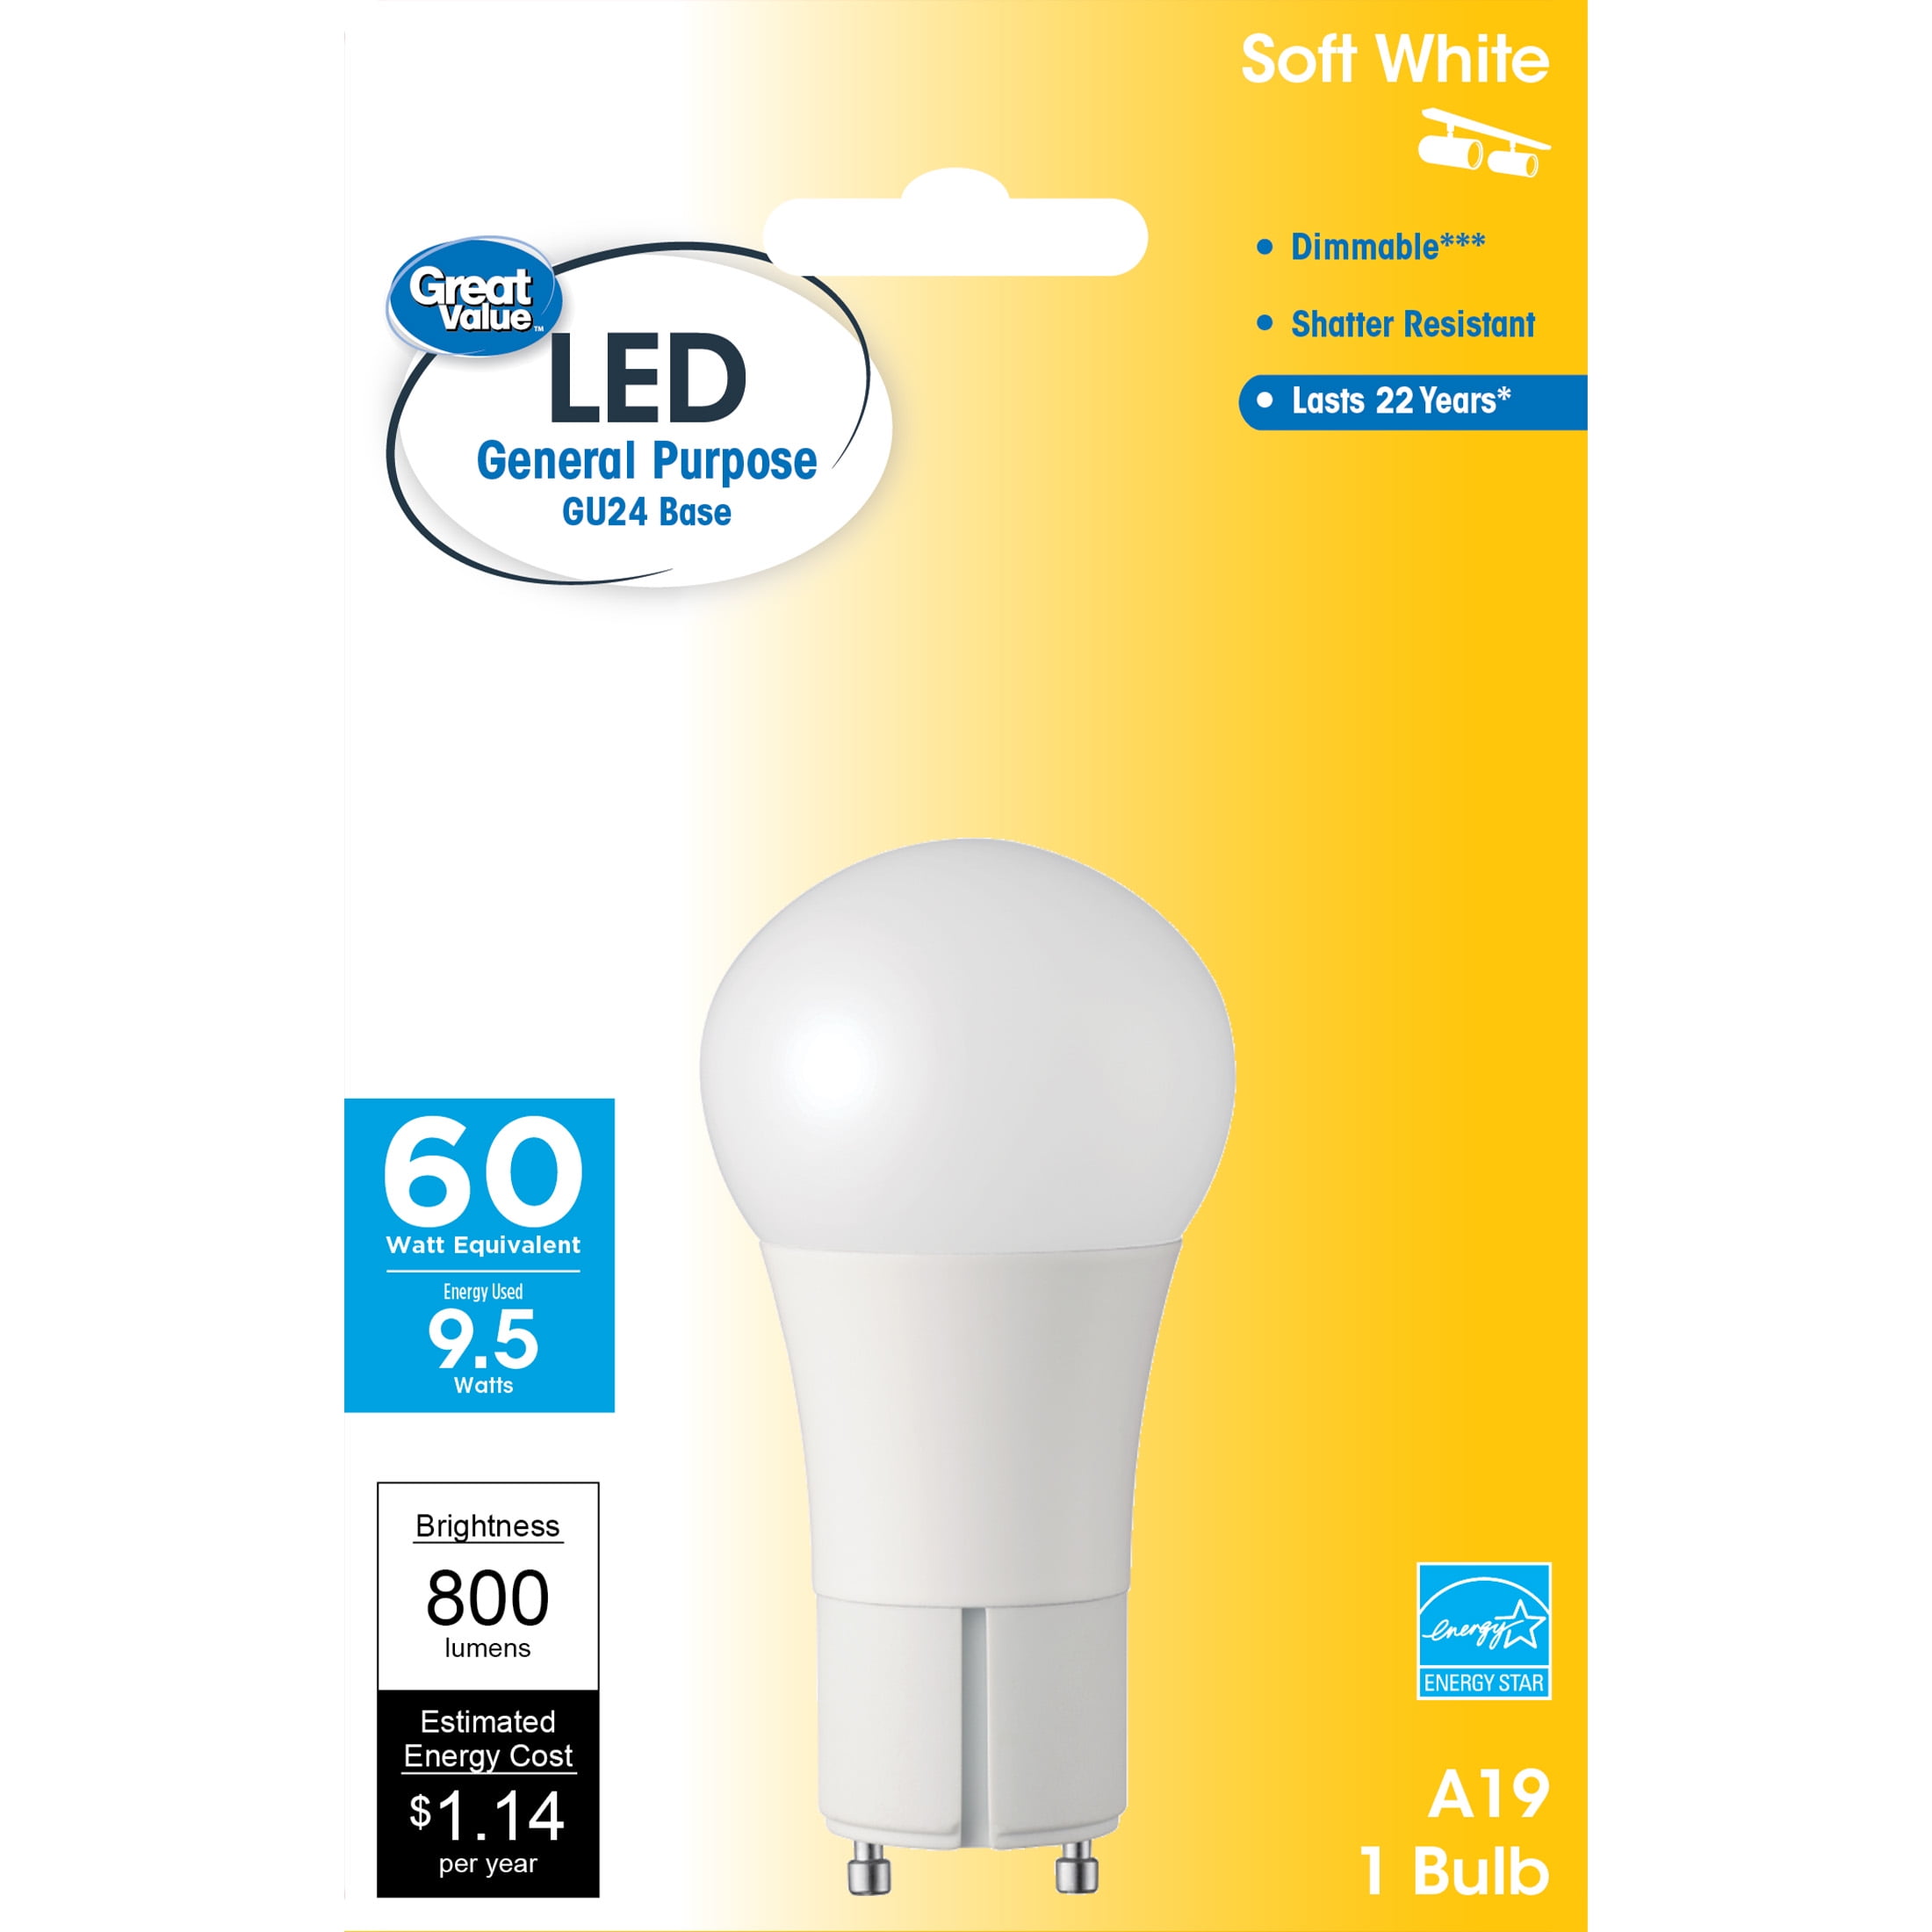 Value LED Light Bulb, 9.5 Watts (60W Equivalent) A19 General Purpose Lamp GU24 Base, Dimmable, Soft White, 1-Pack - Walmart.com